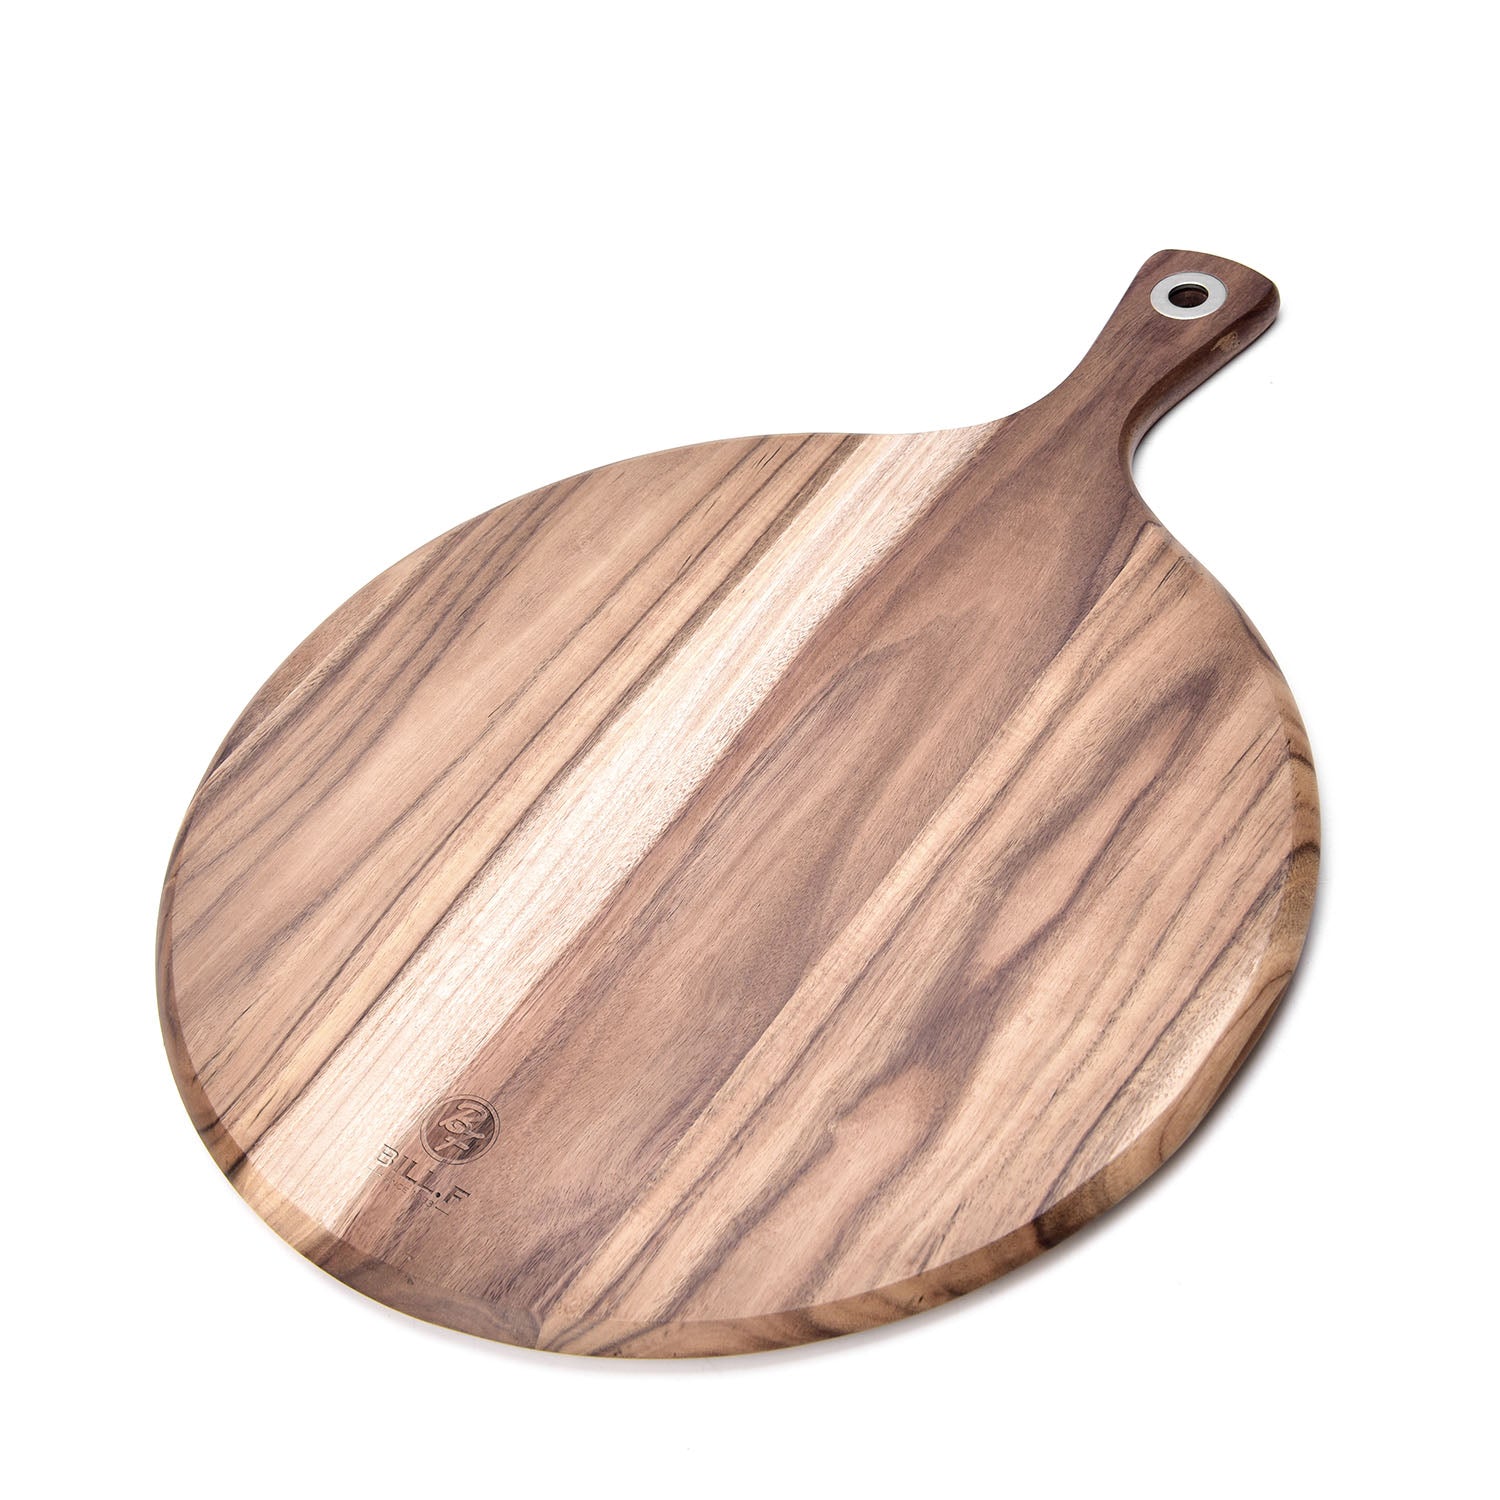 BILL.F Acacia Wood Cutting Board with Handle Small Size Long Wooden  Charcuterie Board Paddle Cheese Board Serving Boards for Kitchen Meat